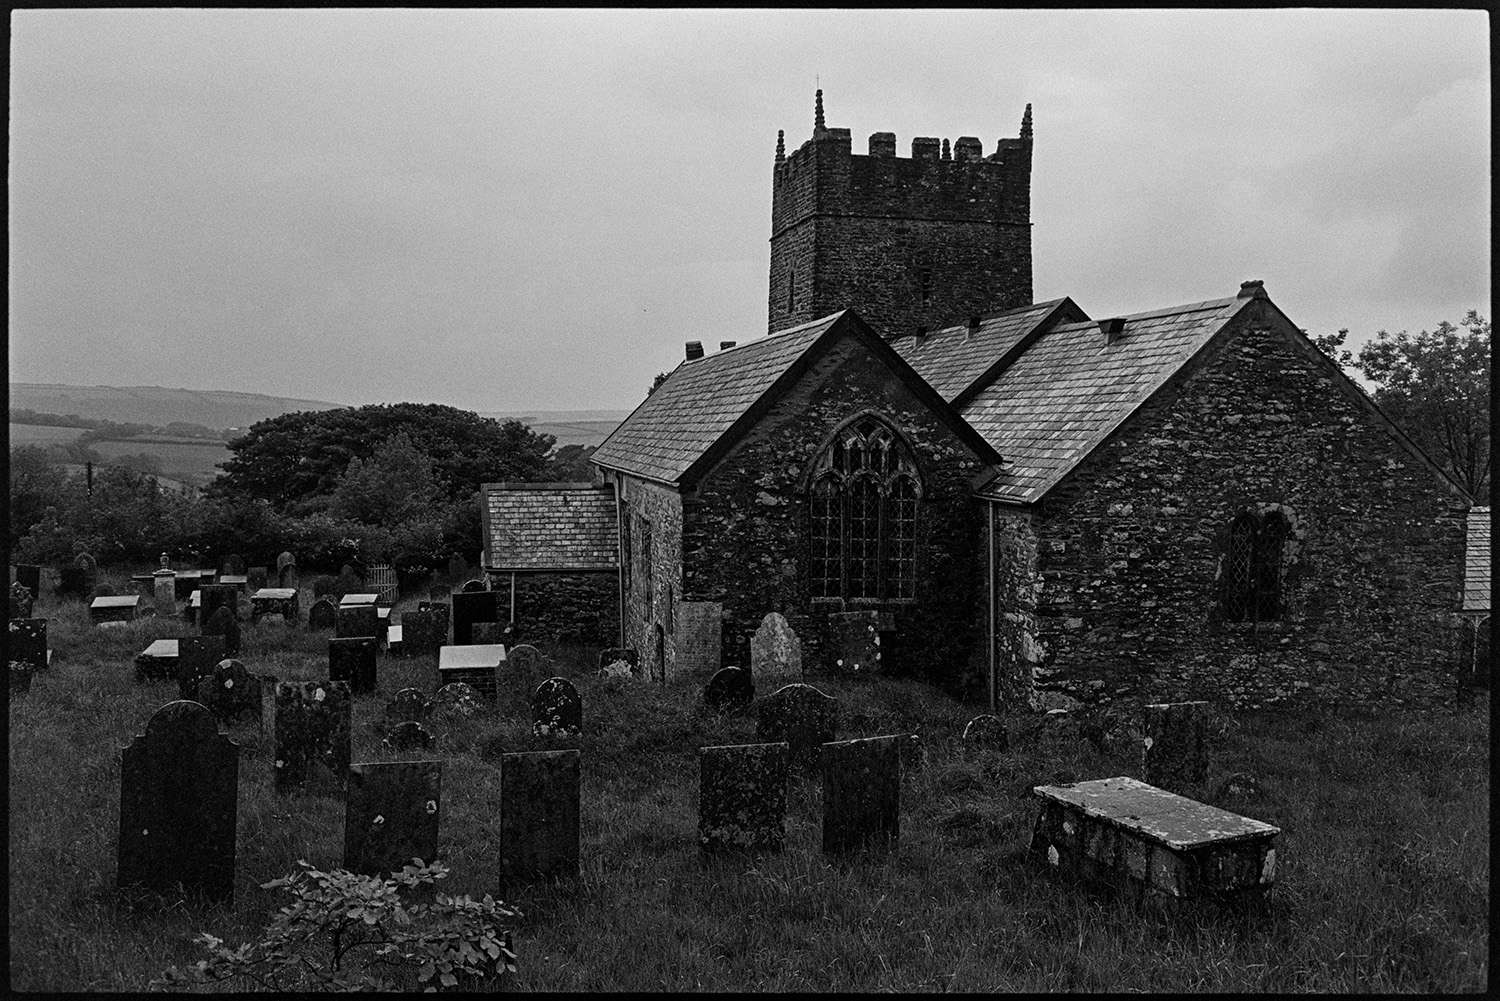 Interior and exterior of redundant church.
[View of the churchyard with tombstones and gravestones and the exterior of a redundant church with a tower at Parracombe.]